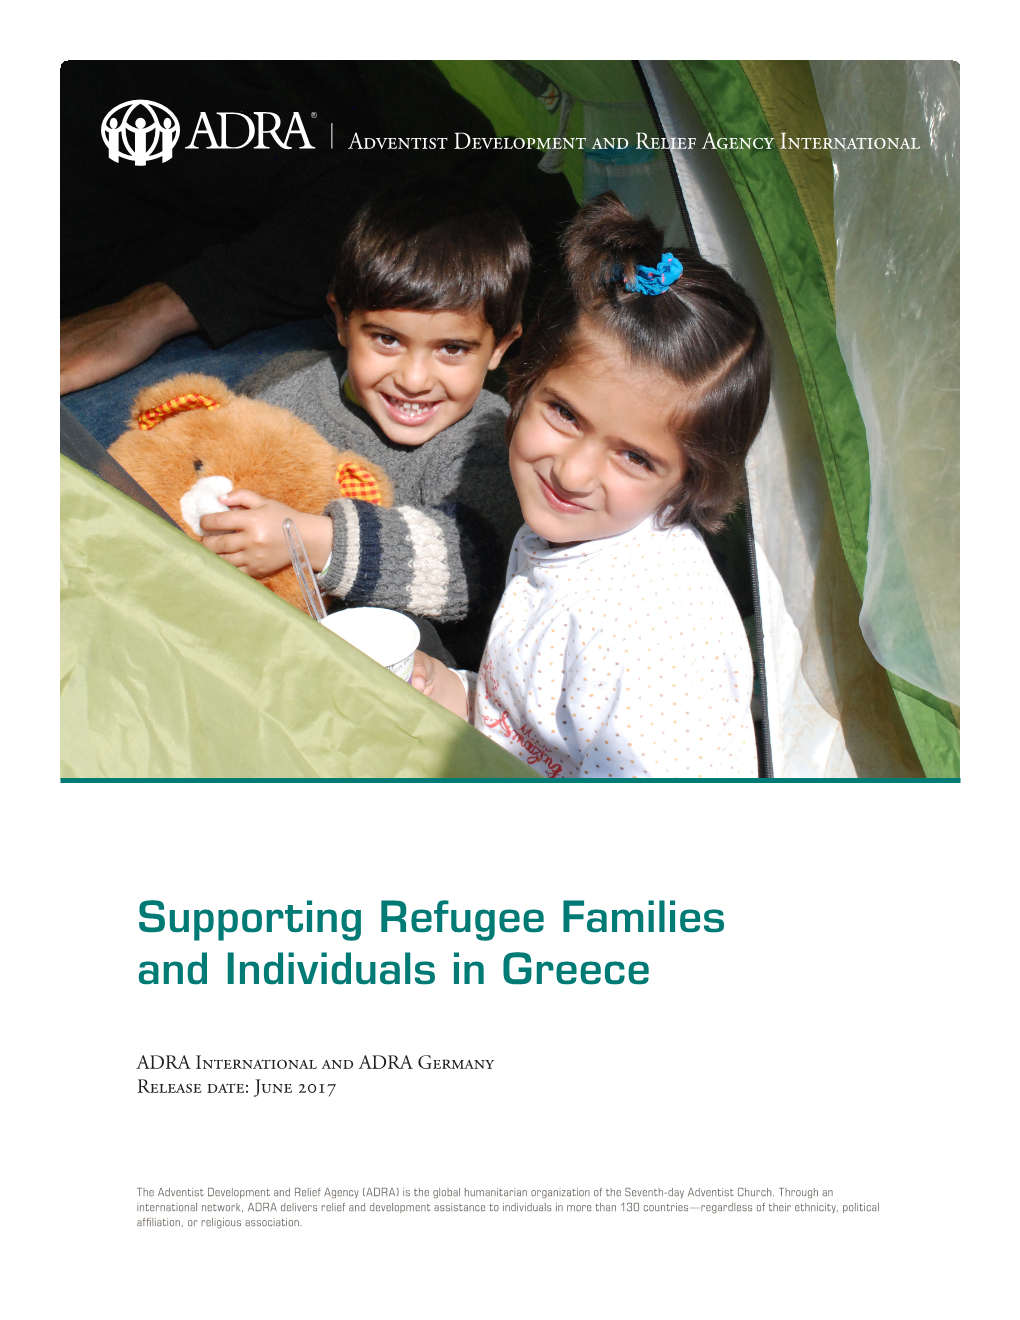 Supporting Refugee Families and Individuals in Greece